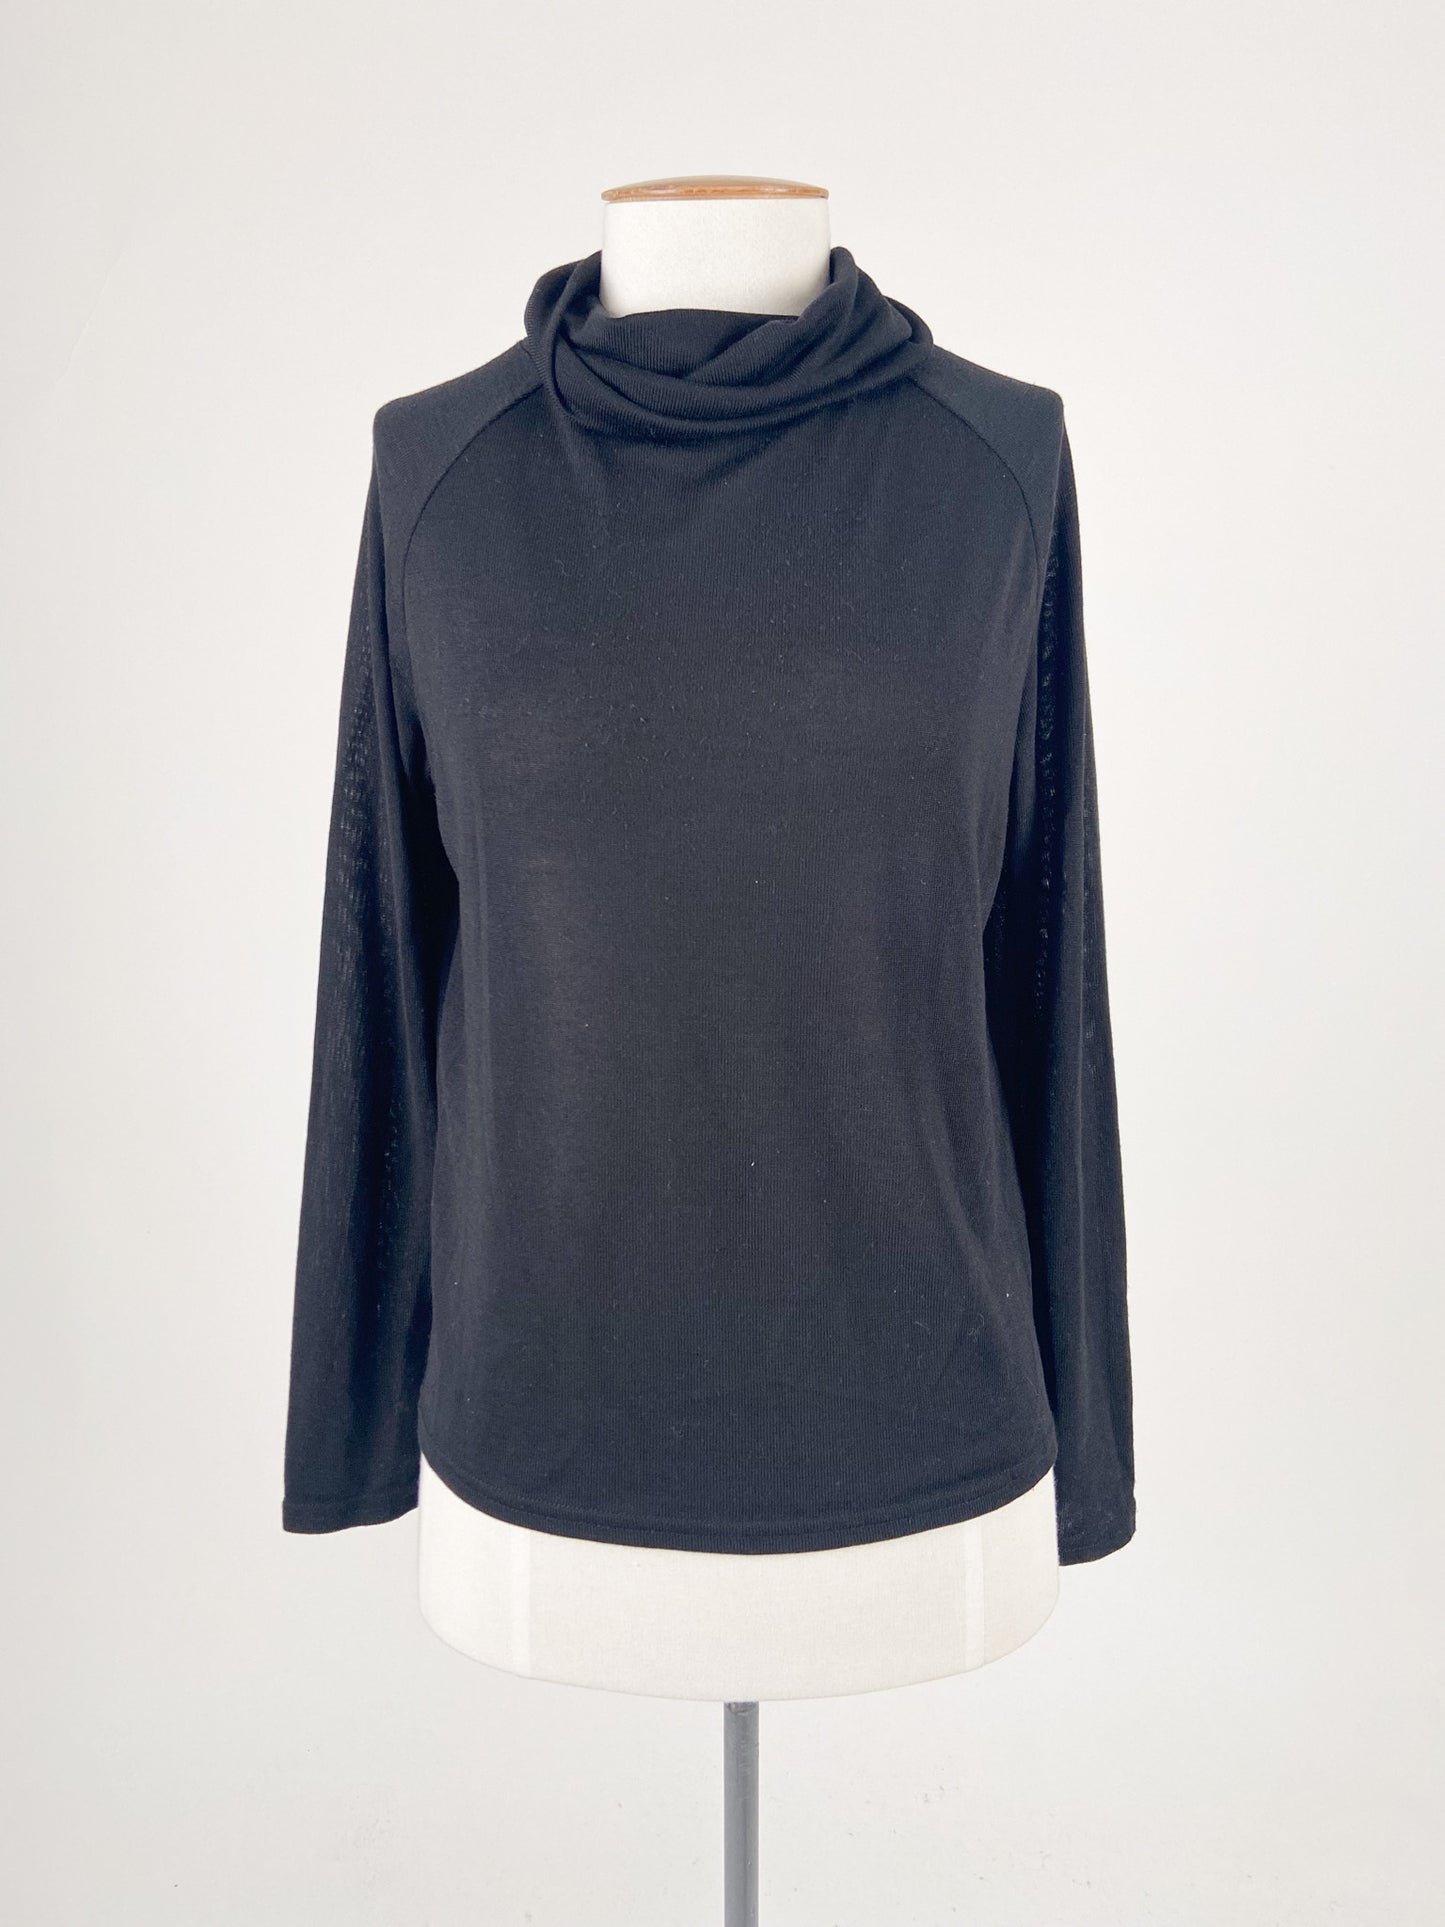 Mirrou | Black Casual Top | Size S